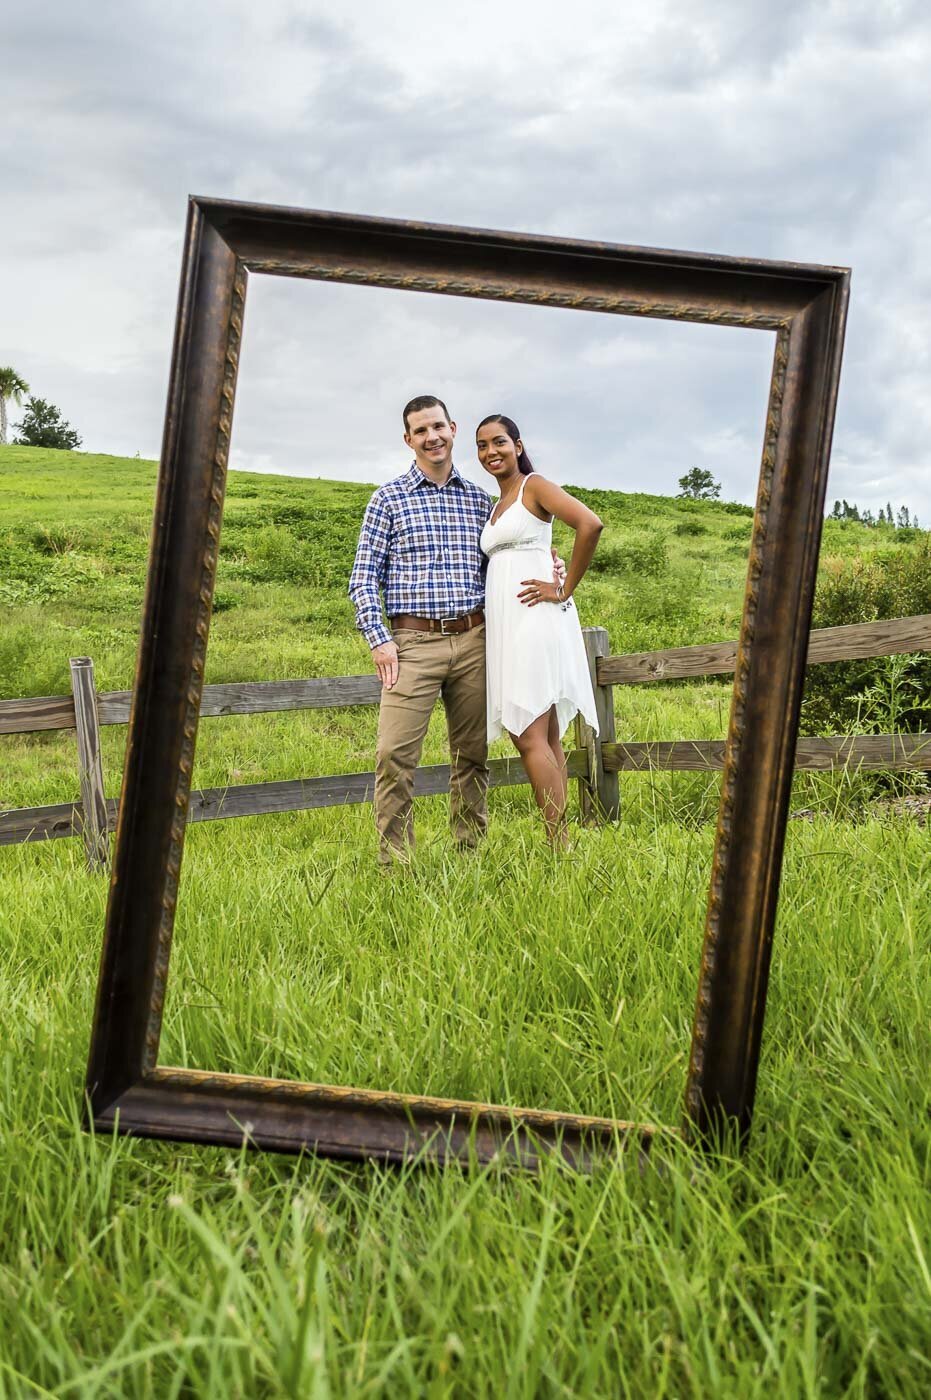 Couple poses through a photo frame during their engagement session.